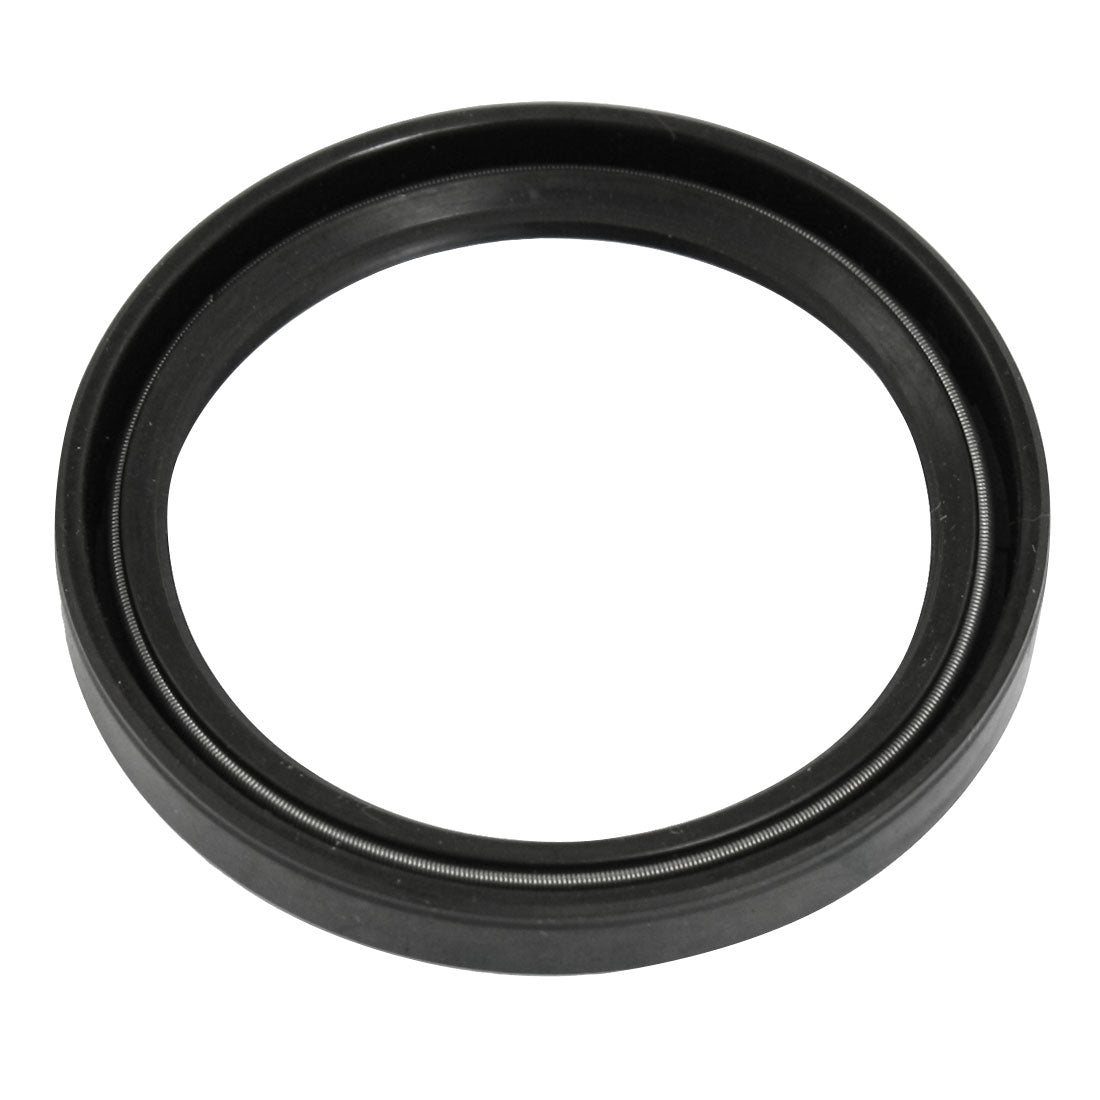 Uxcell Uxcell Black Nitrile Rubber Oil Shaft Seal TC 22mm x 35mm x 7mm